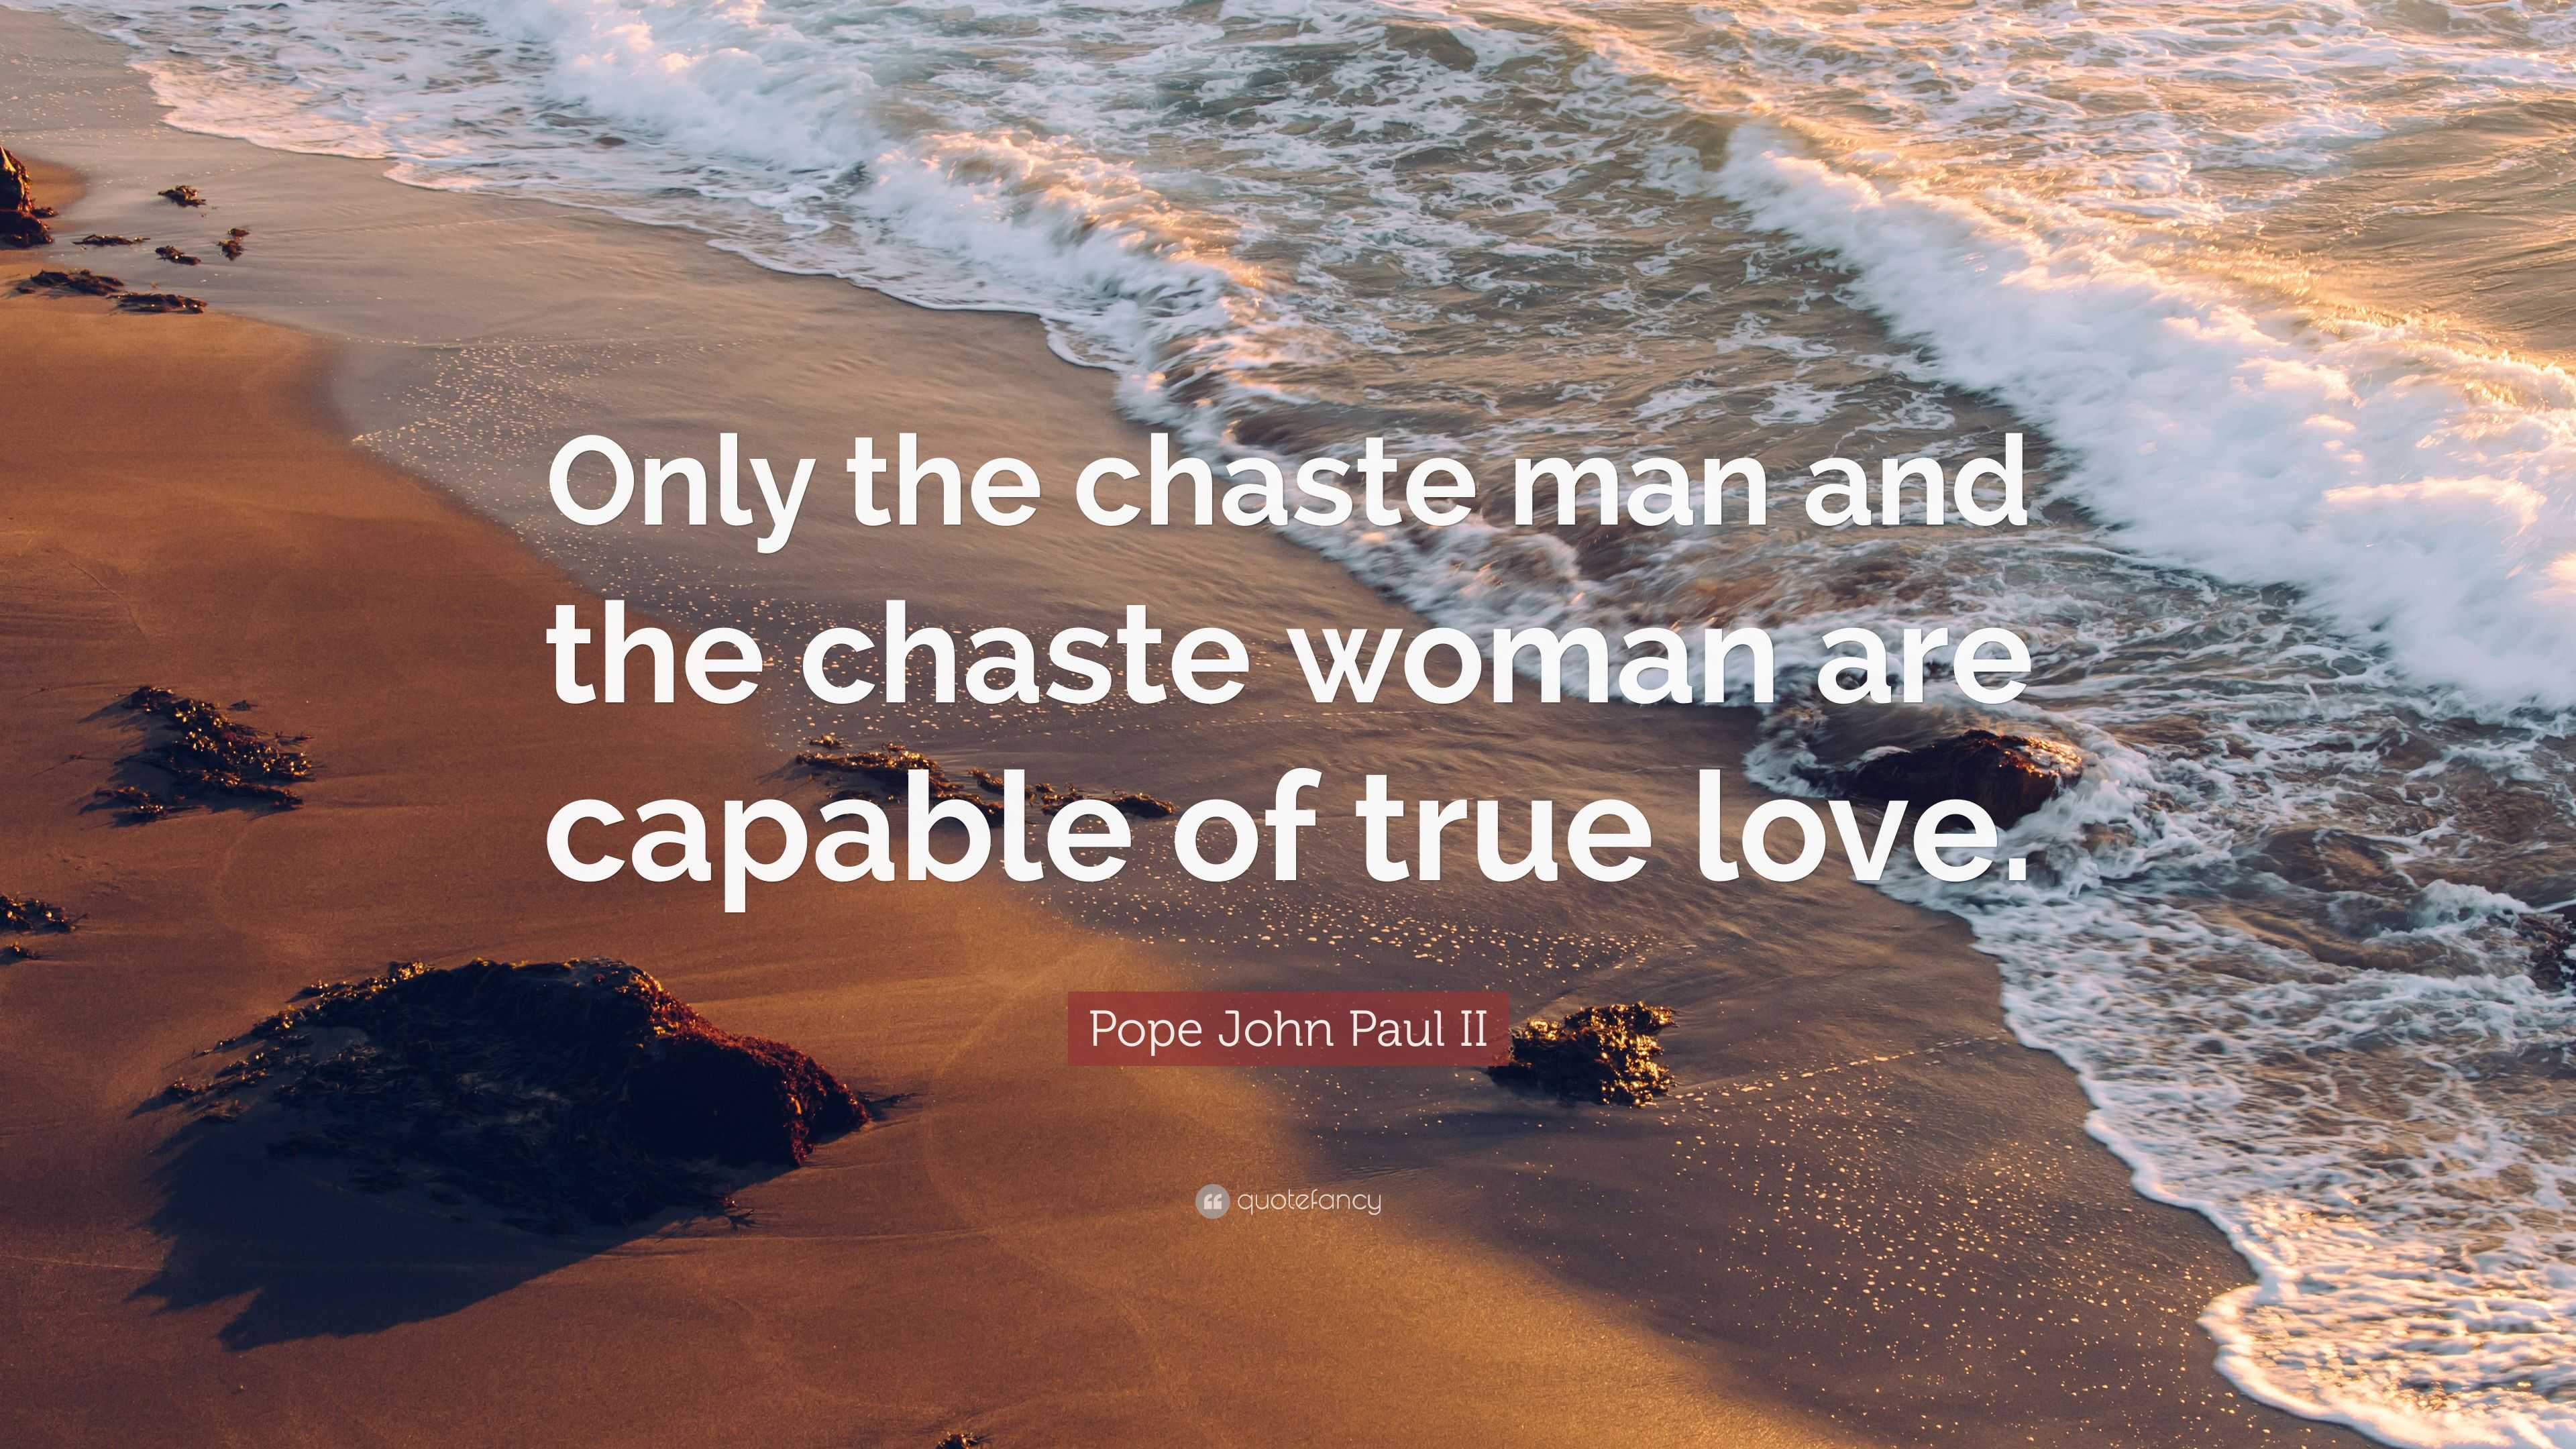 Pope John Paul II Quote: “Only the chaste man and the chaste woman are ...